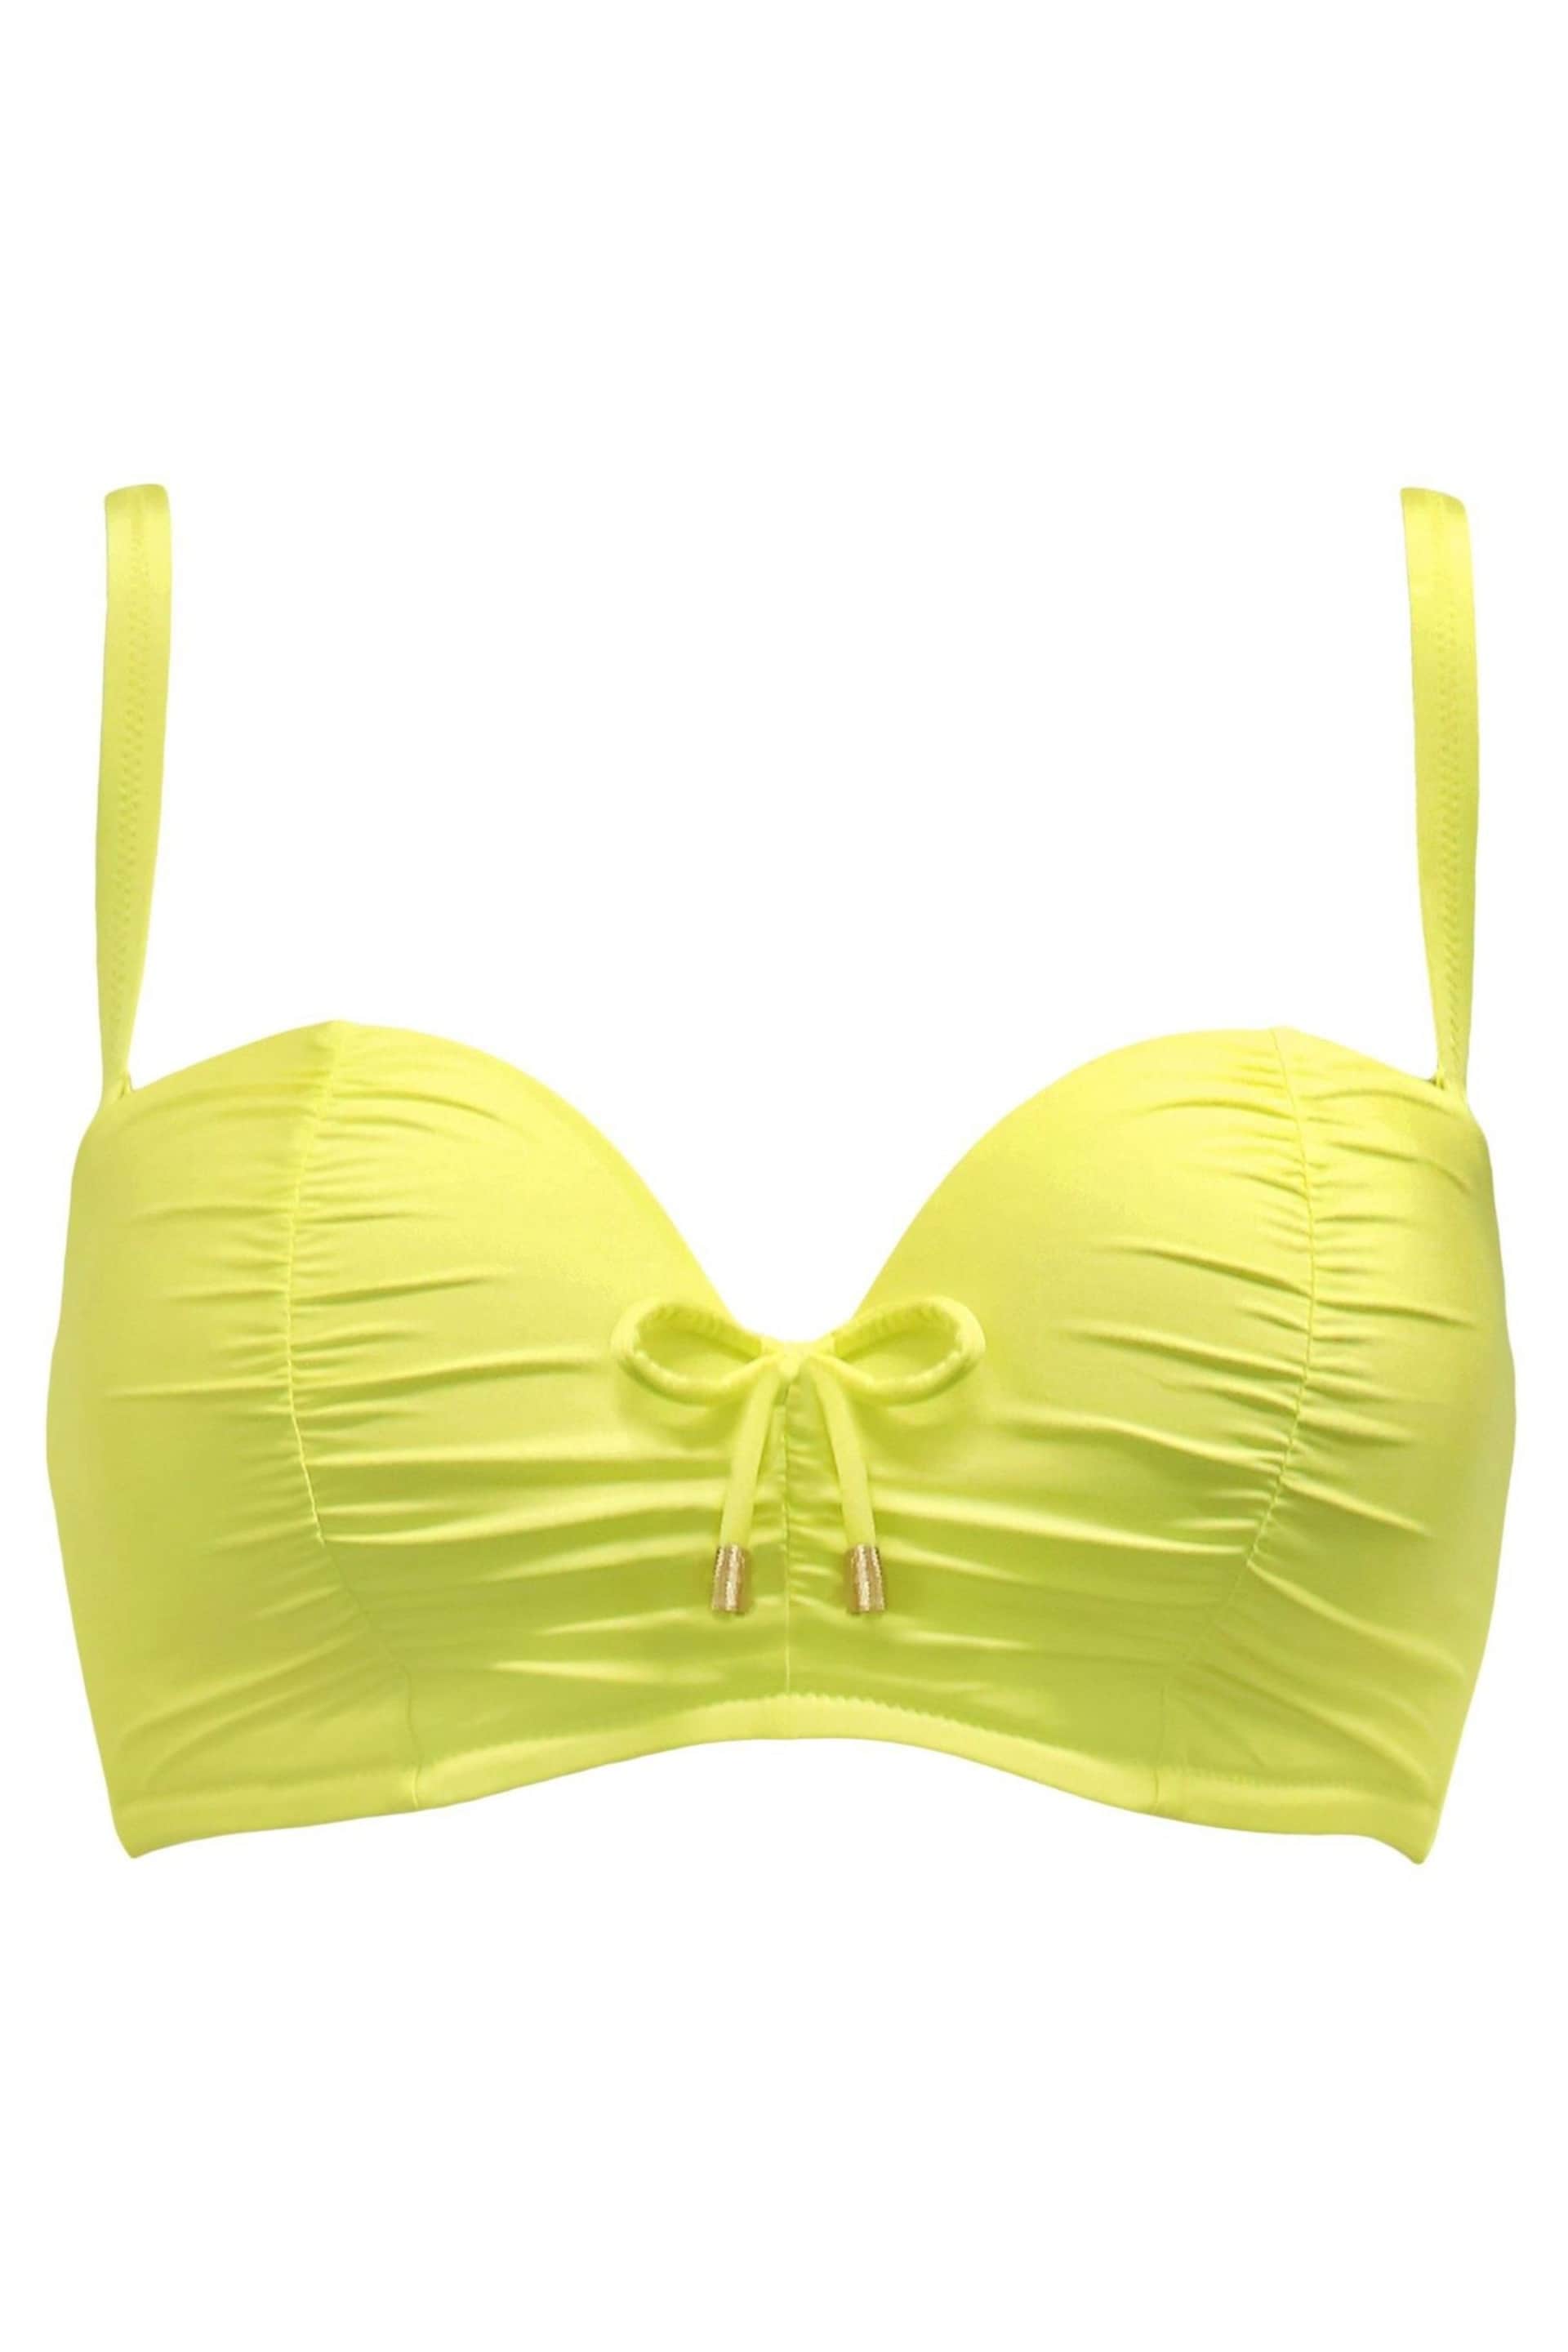 Pour Moi Yellow Santa Cruz Strapless Lightly Padded Underwired Top - Image 4 of 5